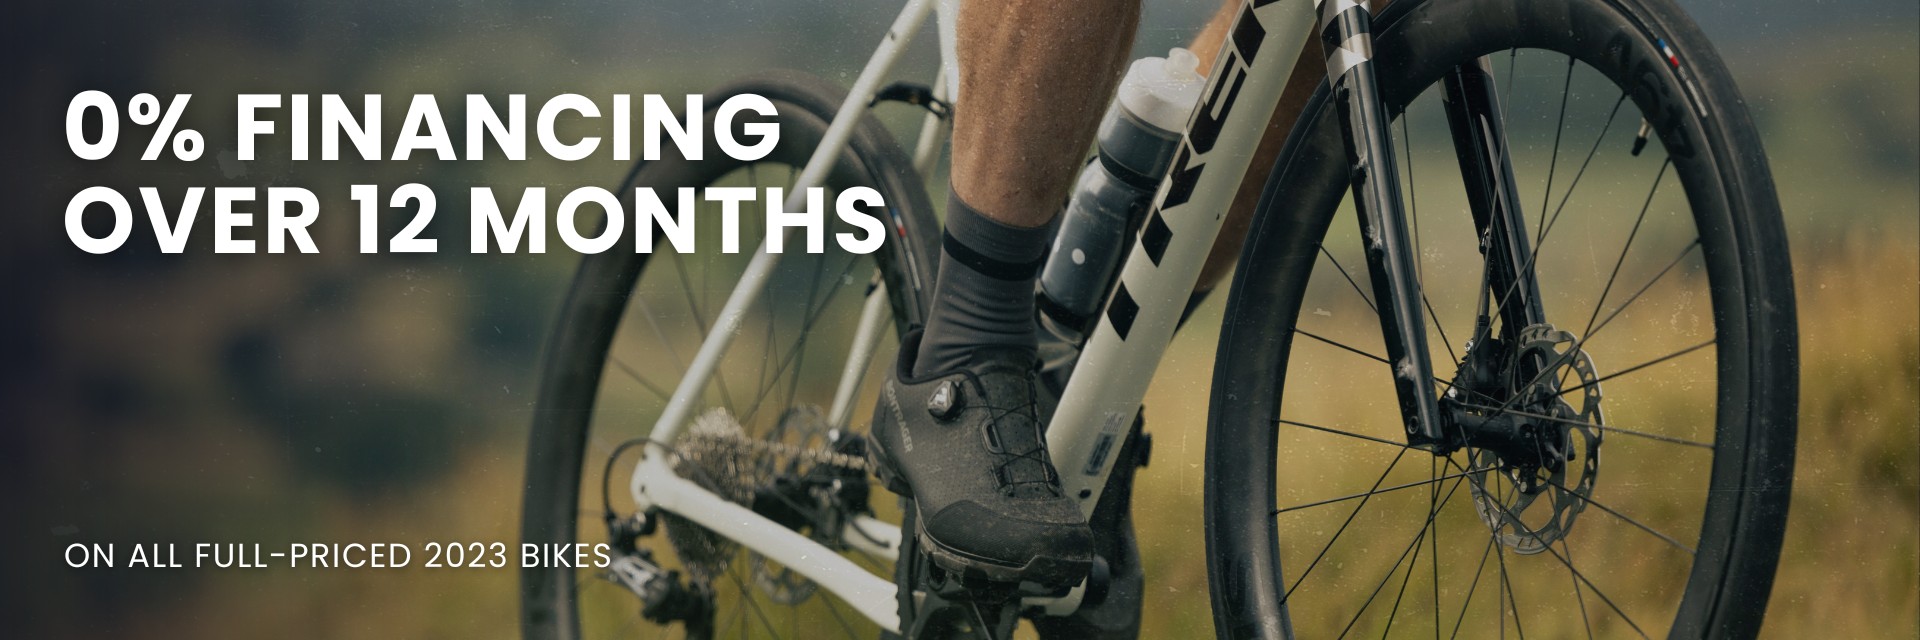 0% Financing Over 12 Months | On All Full-Priced 2023 Bikes